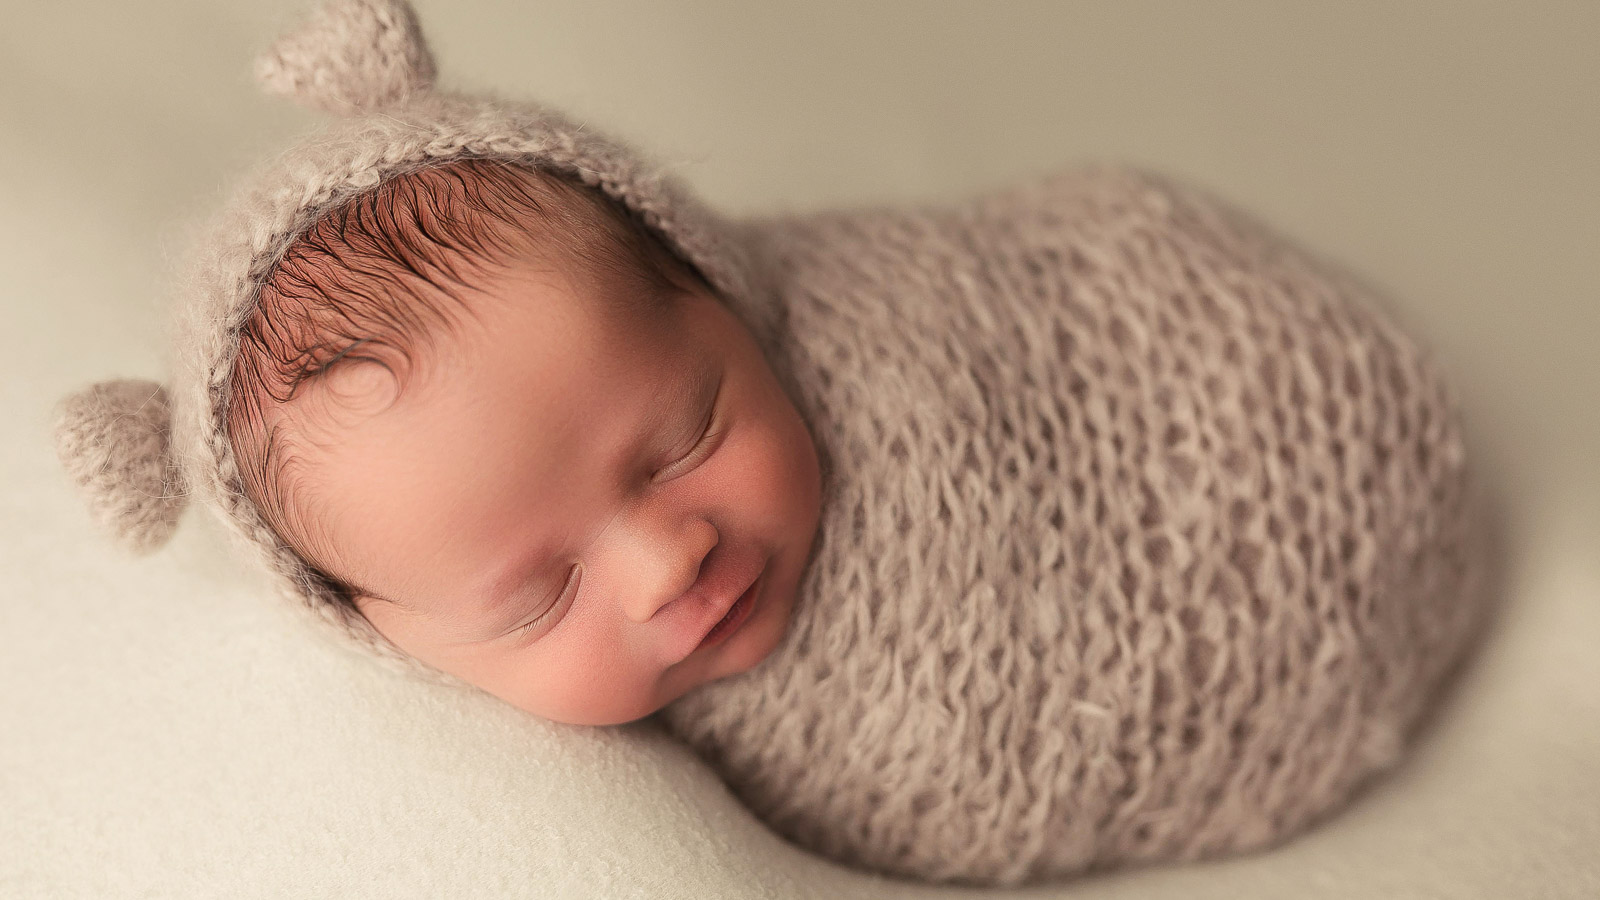 newborn studio portrait of a baby boy in a knitted teddy bear wrap and bonnet in ankeny iowa at my home photographer studio